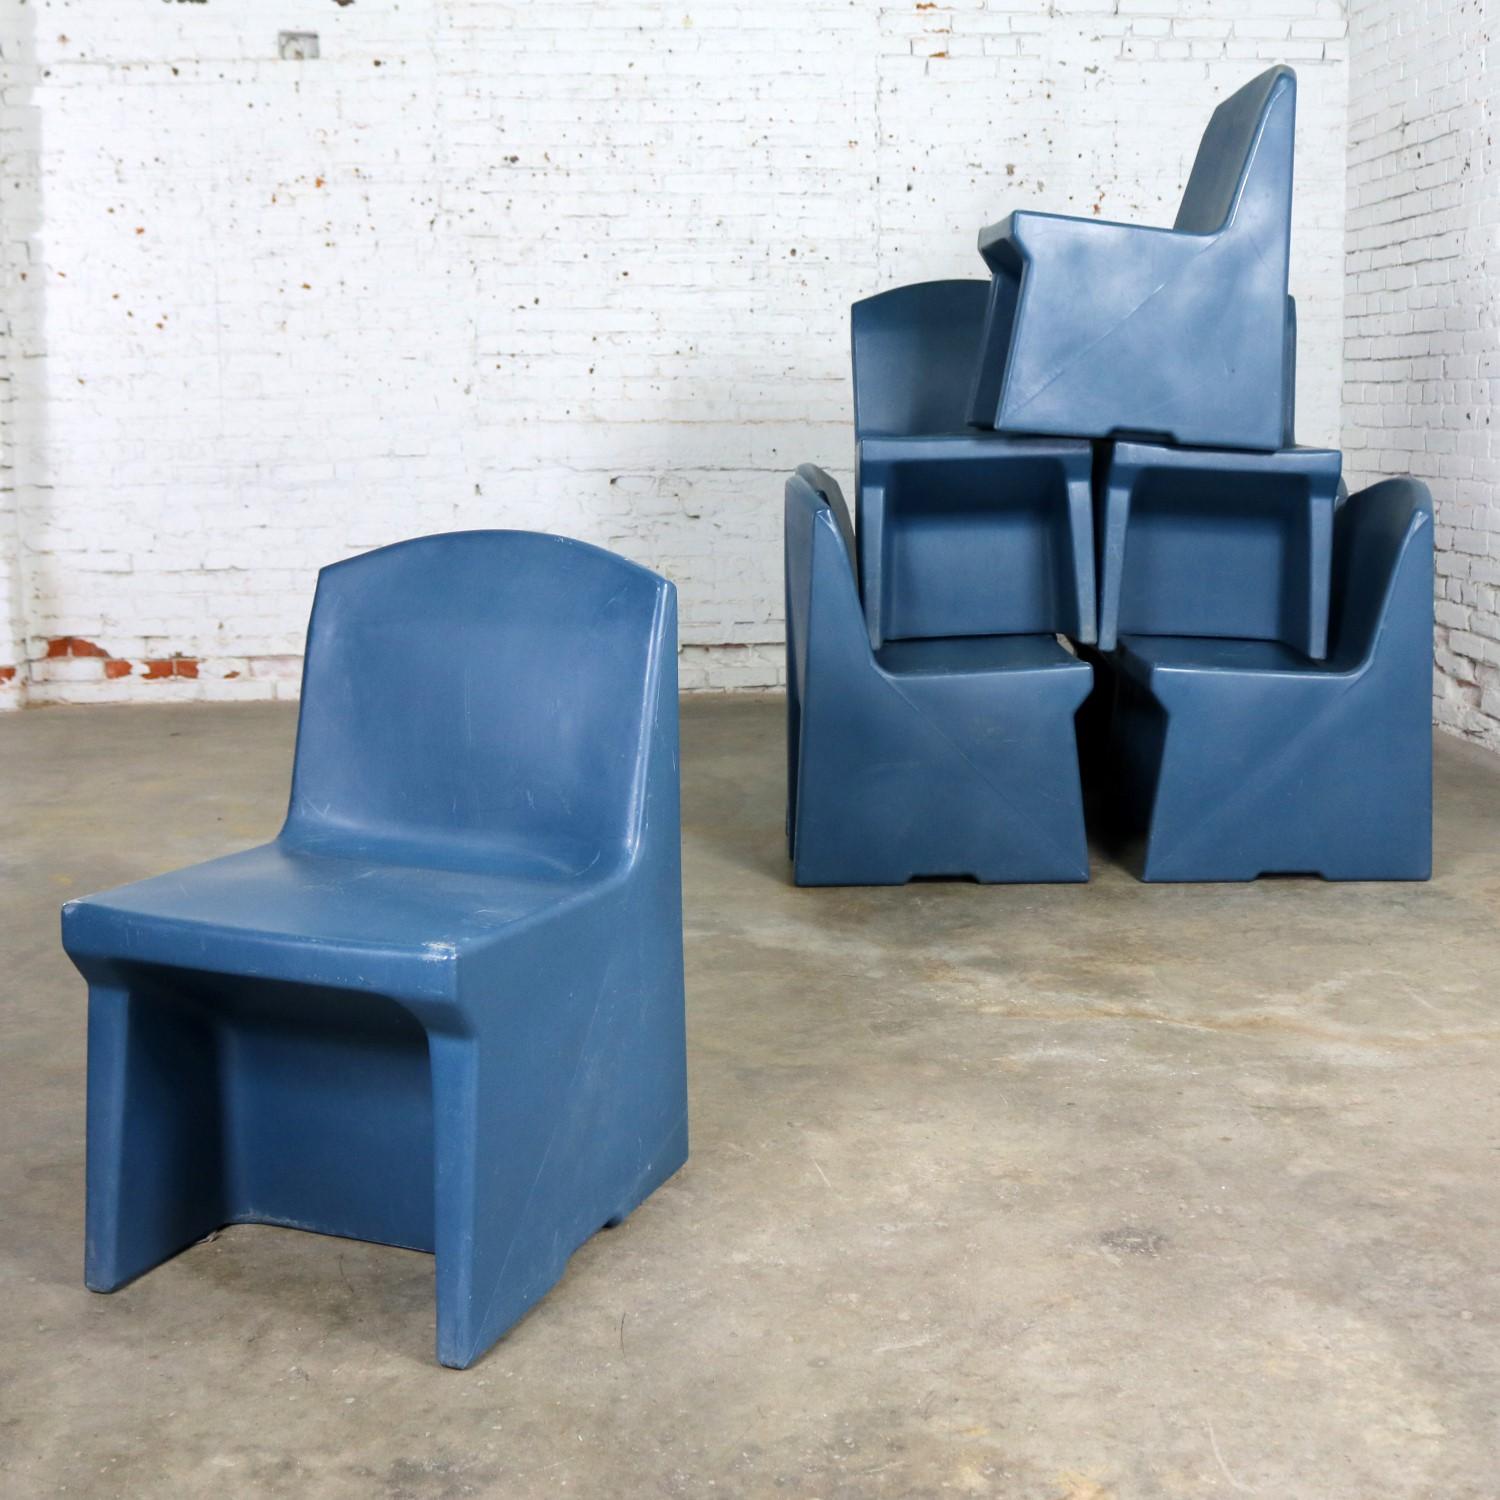 Fun and useful set of eight blue molded polyethylene plastic side or slipper chairs by Norix from the Toughcare Series. In great condition and ready to use. They do have the patina of age and use with small nicks and scratches as you would expect.